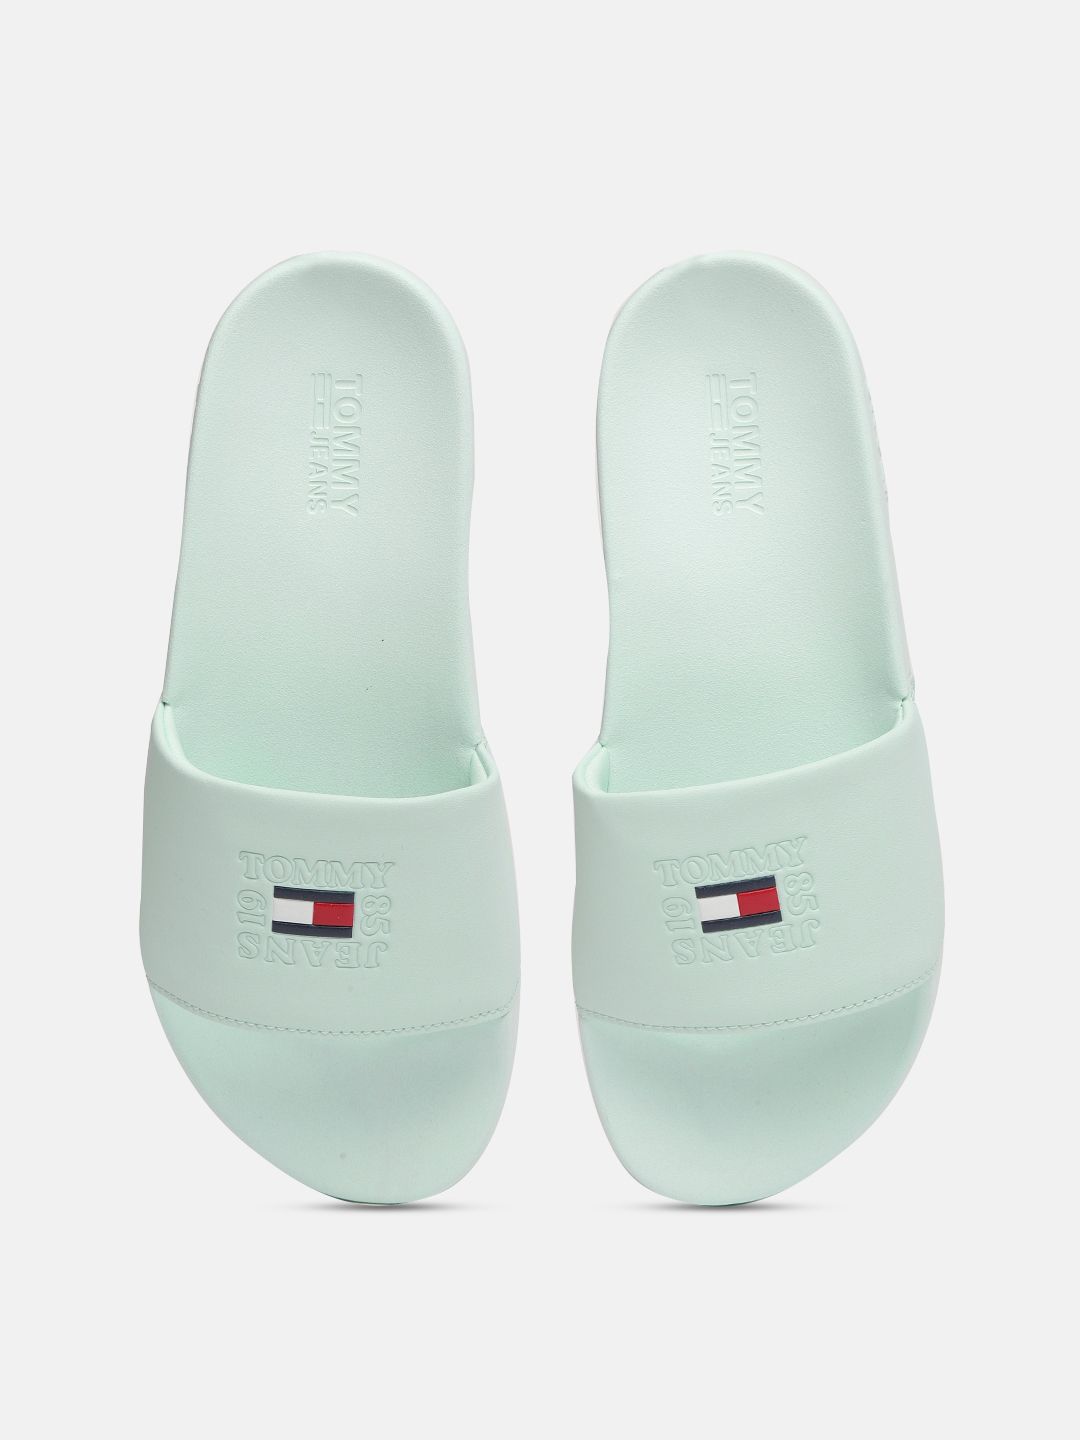 Tommy Hilfiger Women Mint Green Brand Logo Printed Sliders Price in India